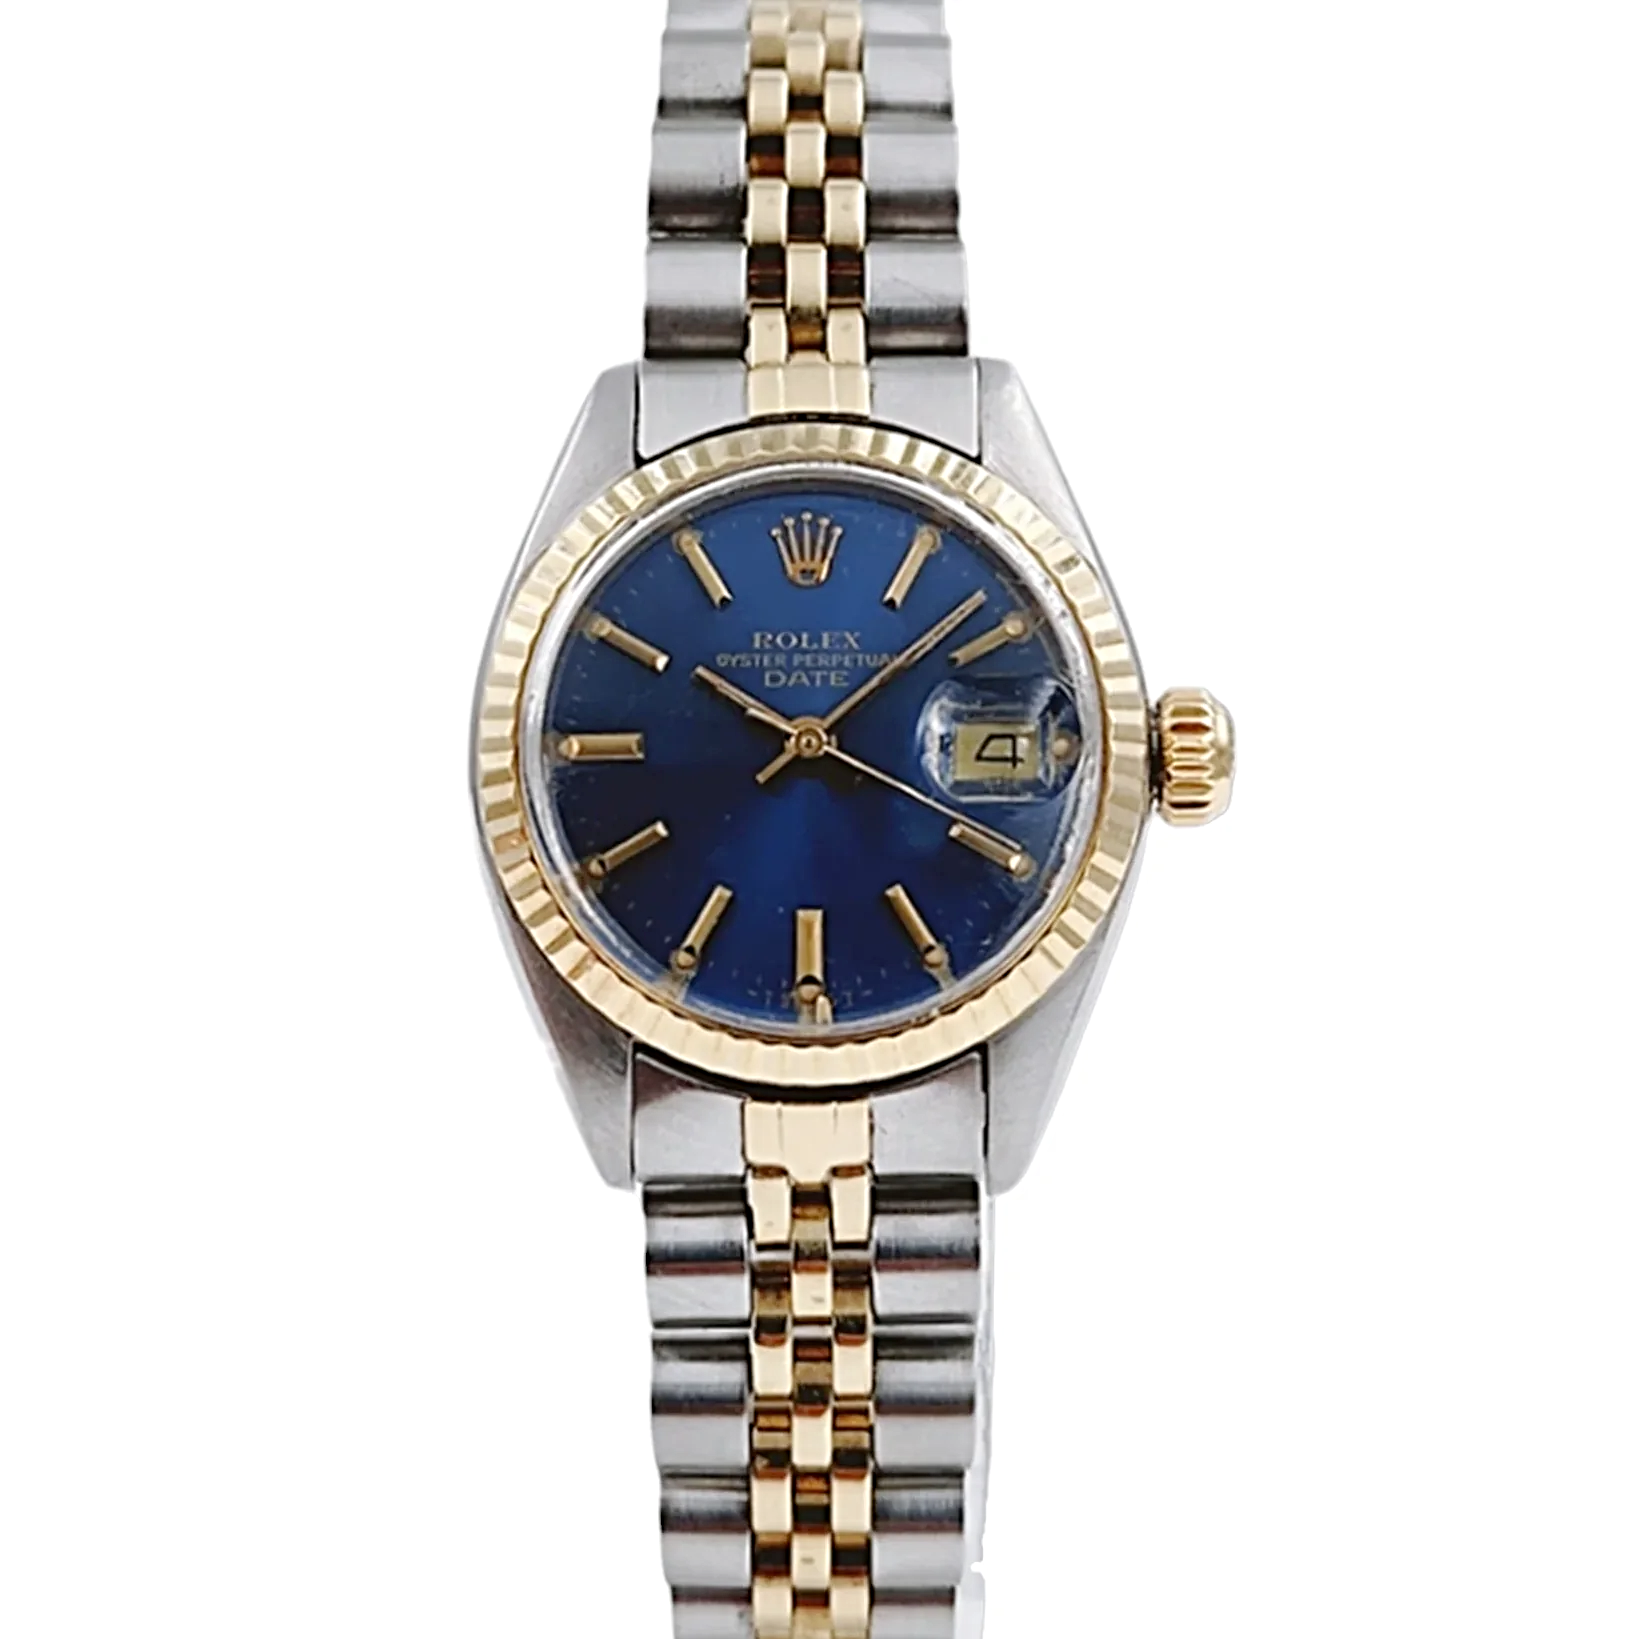 Ladies Rolex 26mm DateJust Two Tone 18K Yellow Gold / Stainless Steel Watch with Blue Dial and Fluted Bezel. (Pre-Owned 6917)